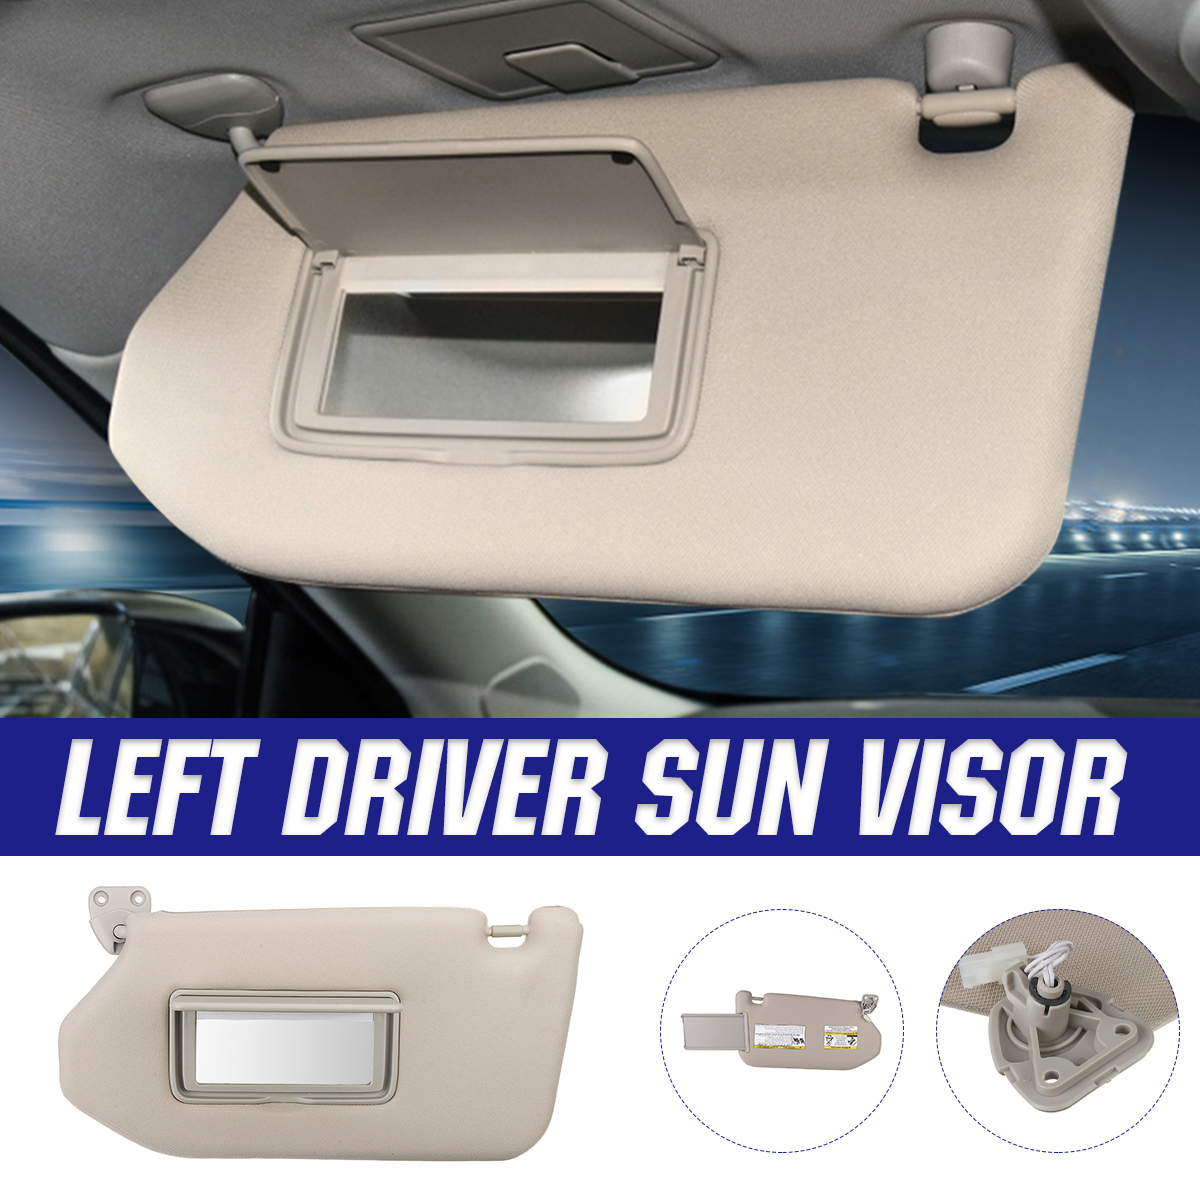 Vikter Driver Side Sun Visor Left Side with Lamp Compatible with 2013-2019 Nissan Pathfinder Infiniti QX60 Infiniti JX35 with Sunroof Replaces# 96401-9PB0A